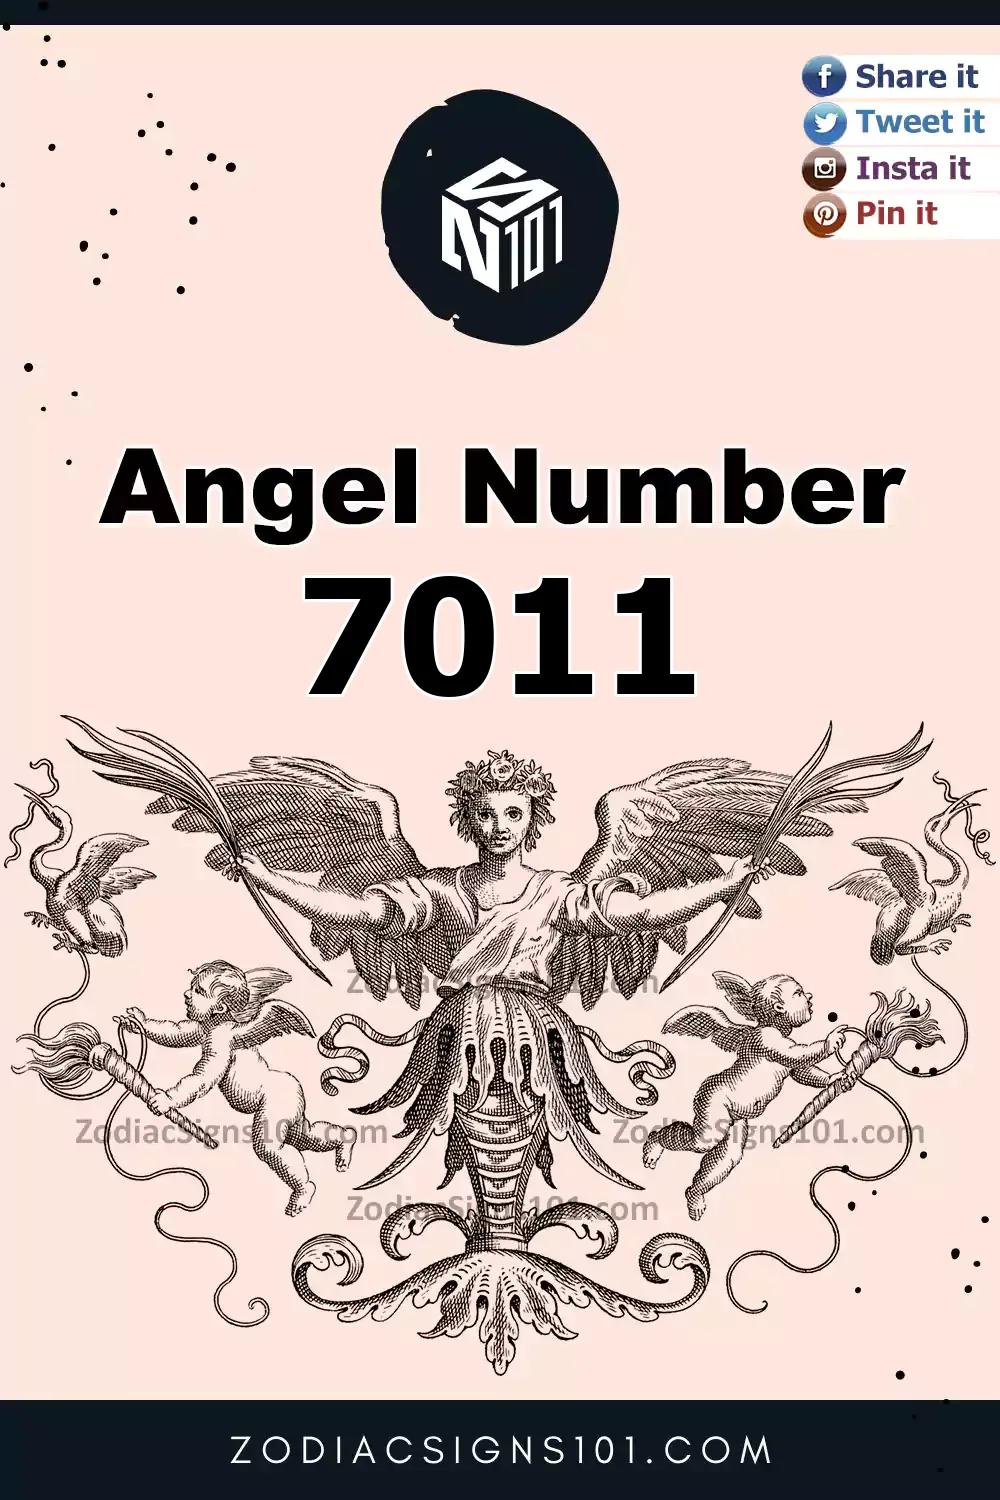 7011 Angel Number Meaning